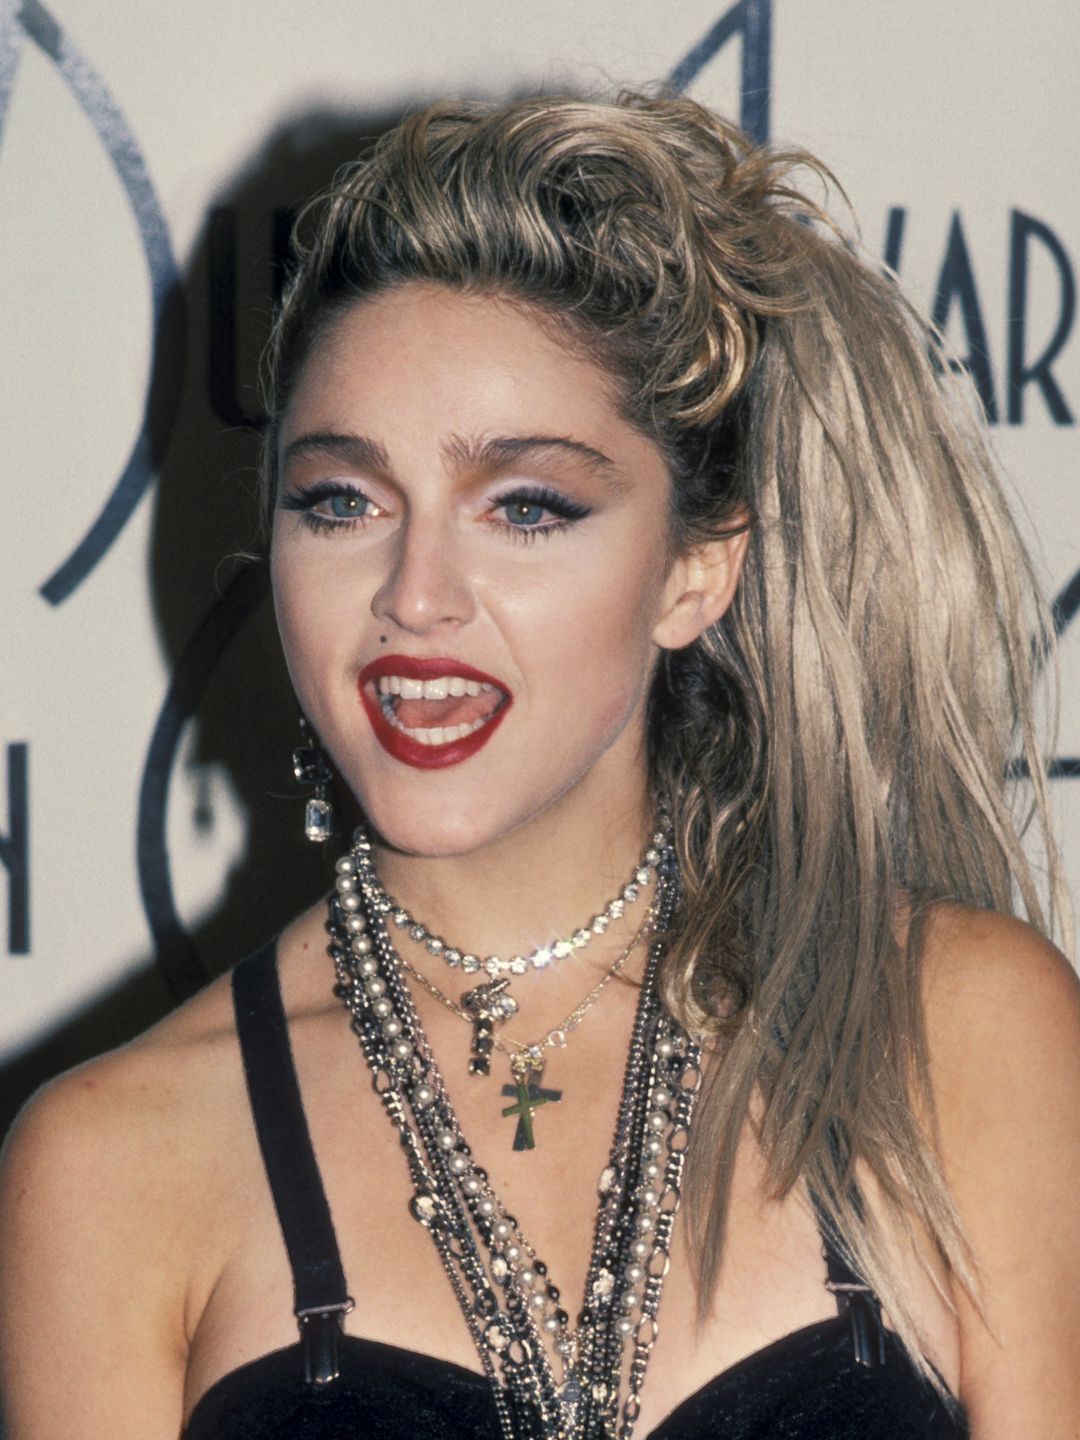 80s hairstyles that are still trending right now